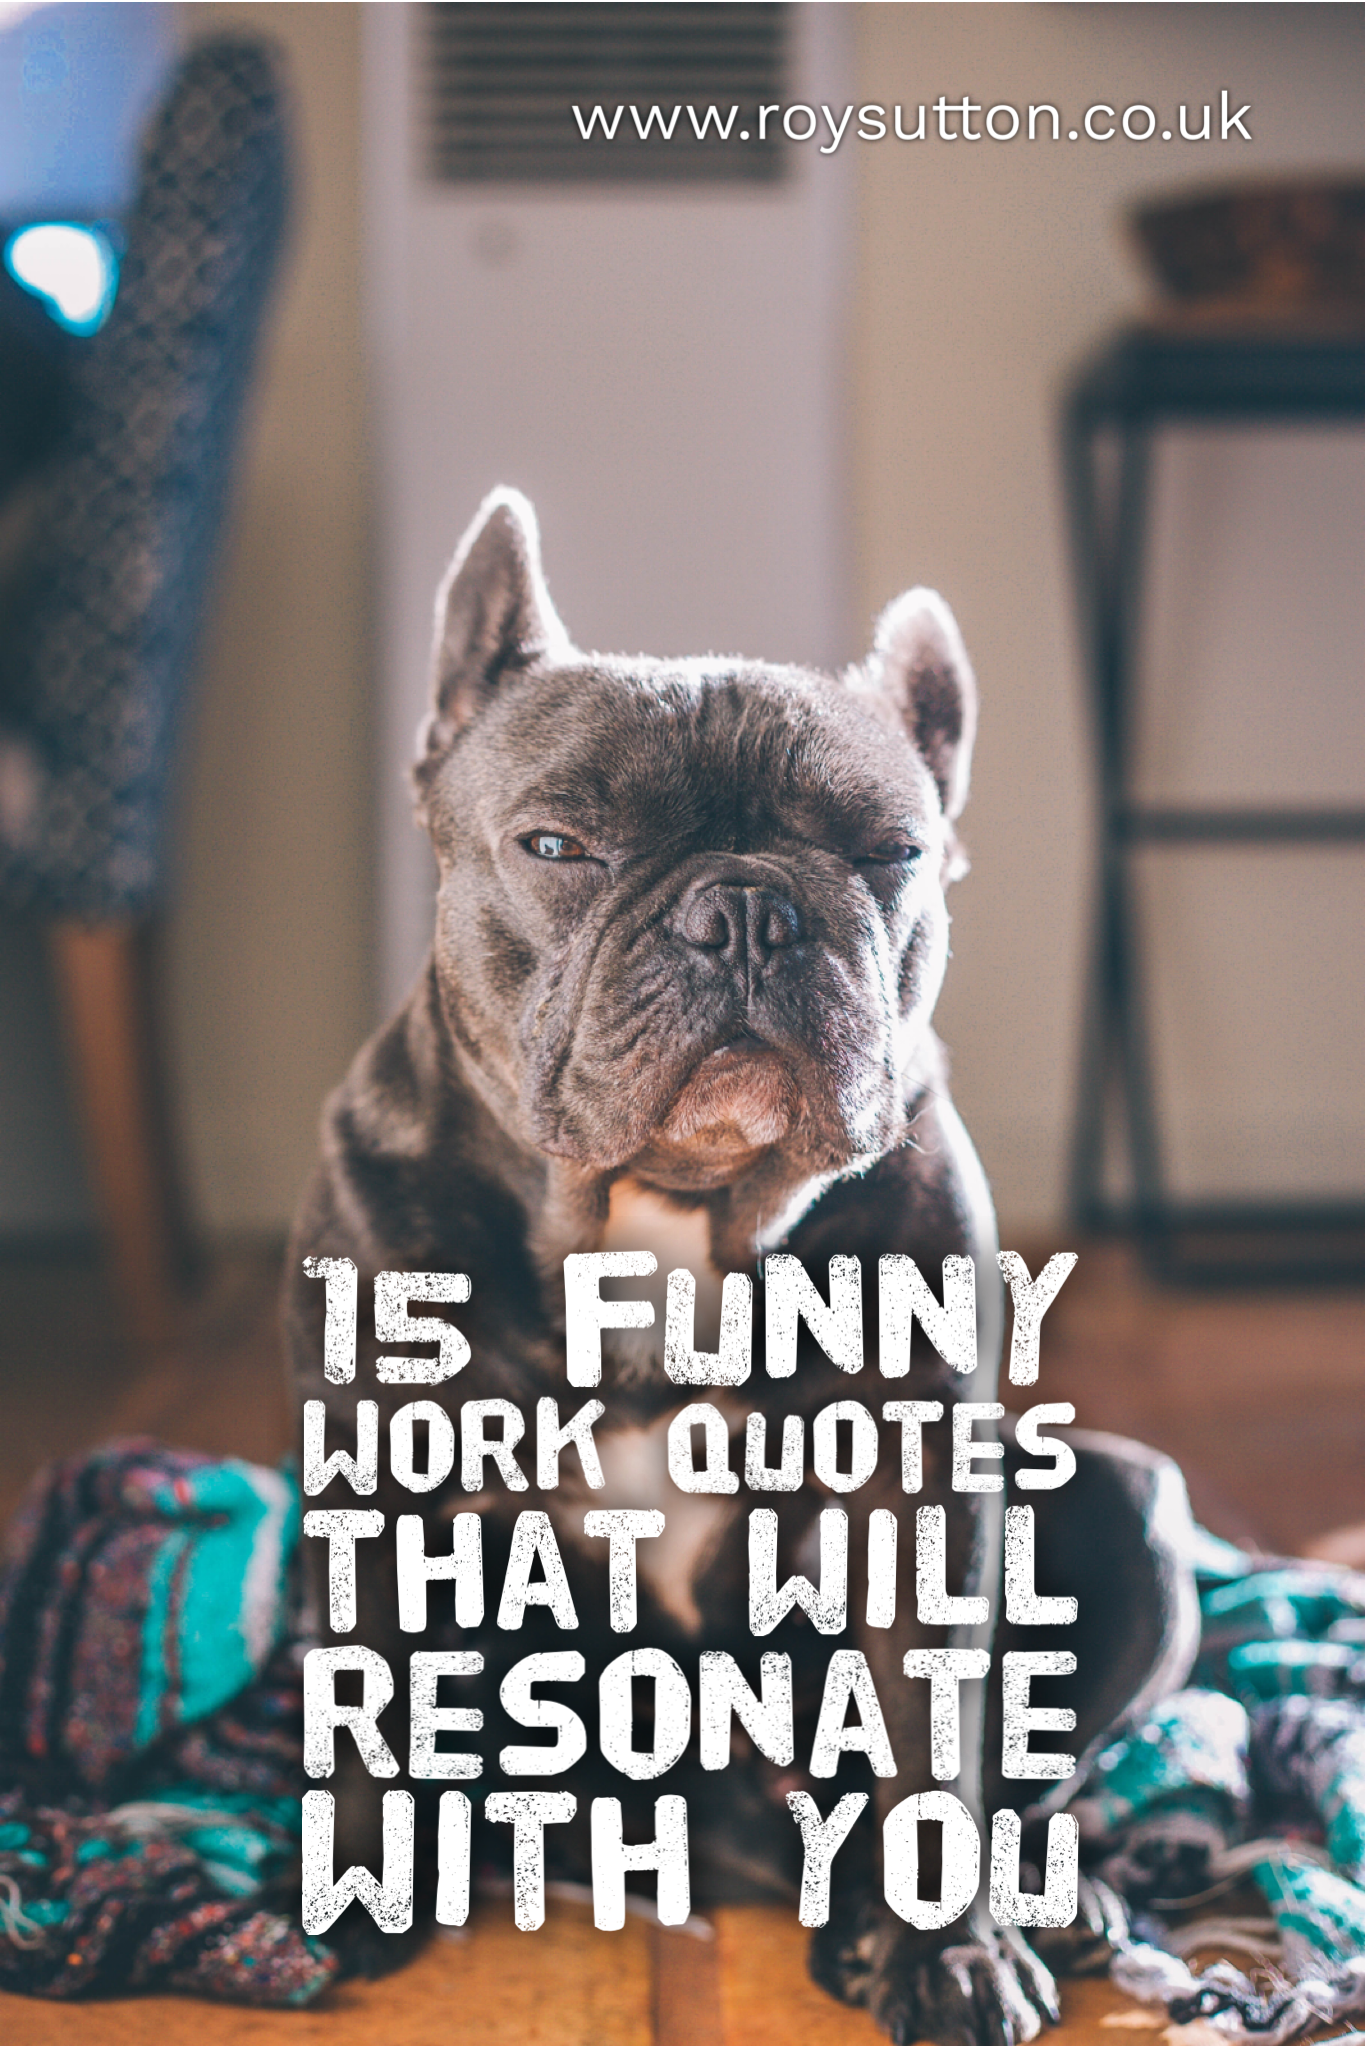 15 funny work quotes that will certainly resonate with you - Roy Sutton